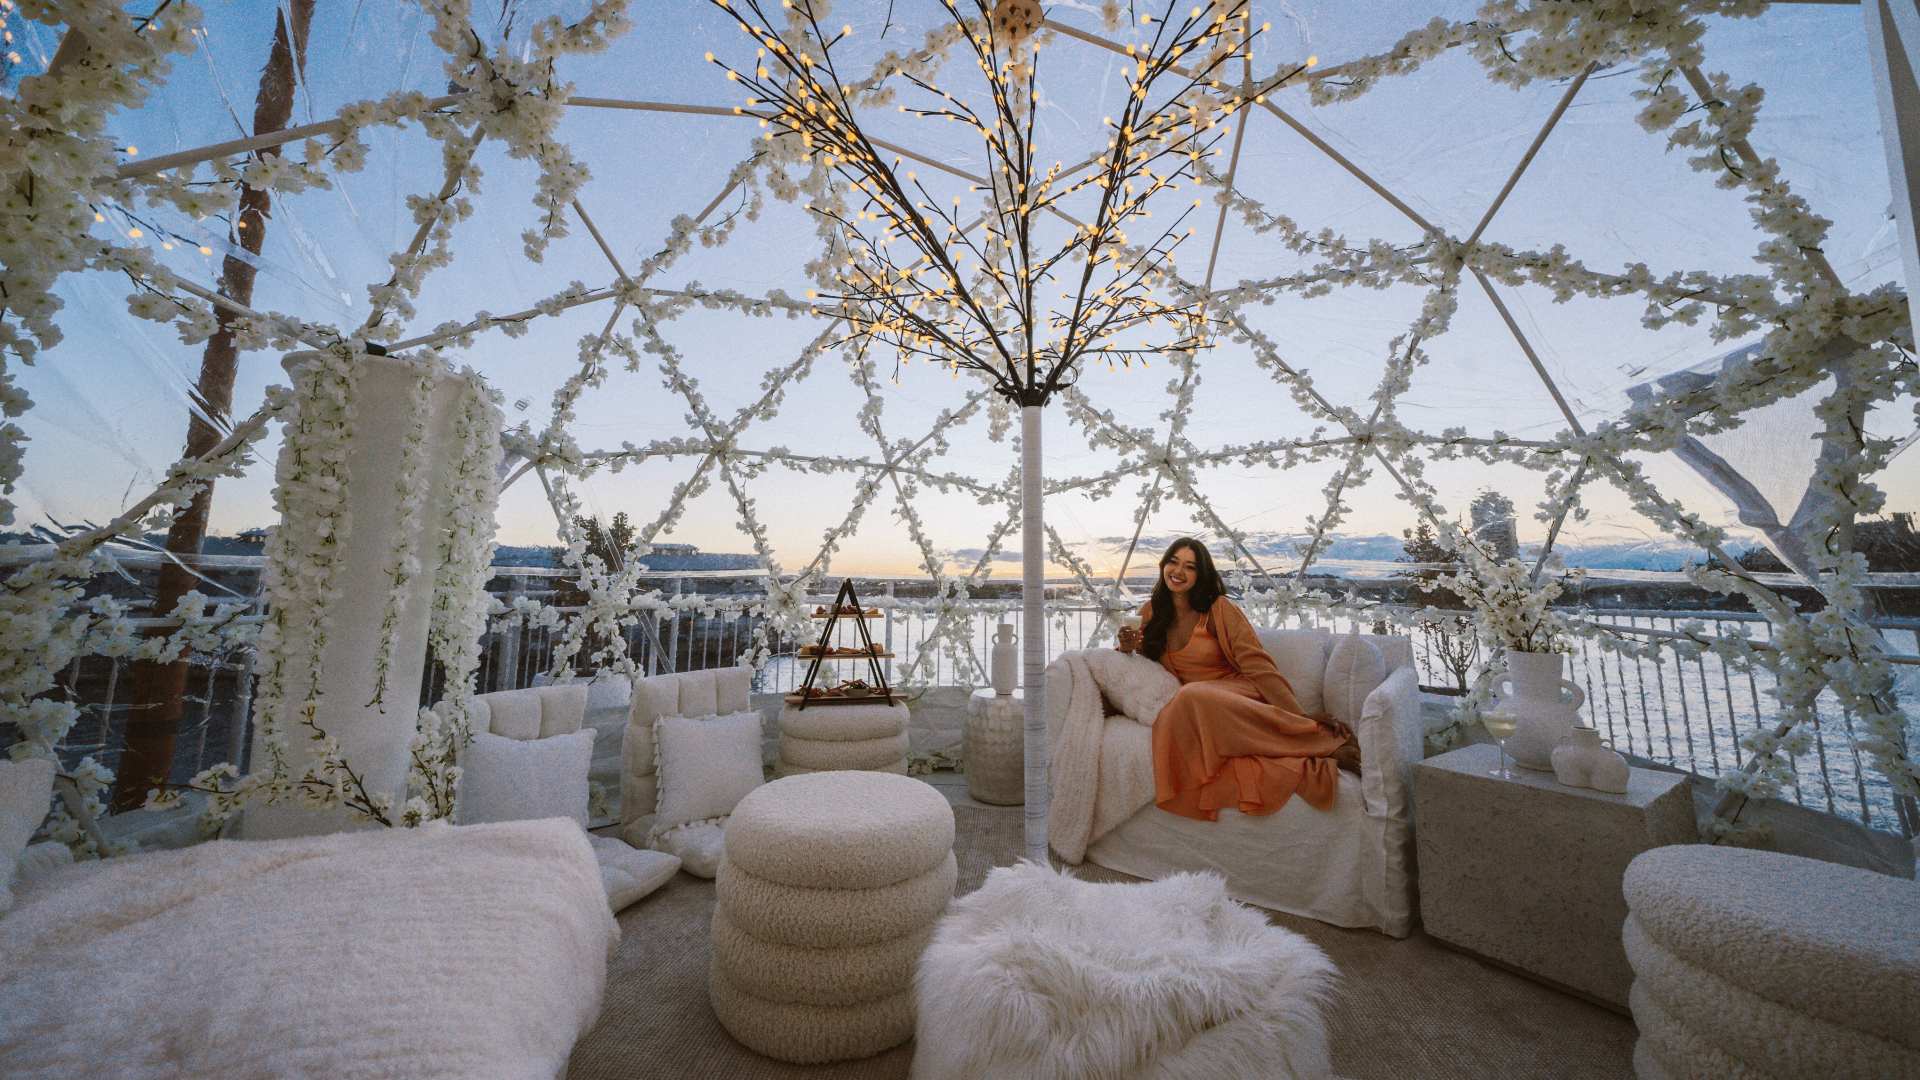 Igloos on the Pier 2022